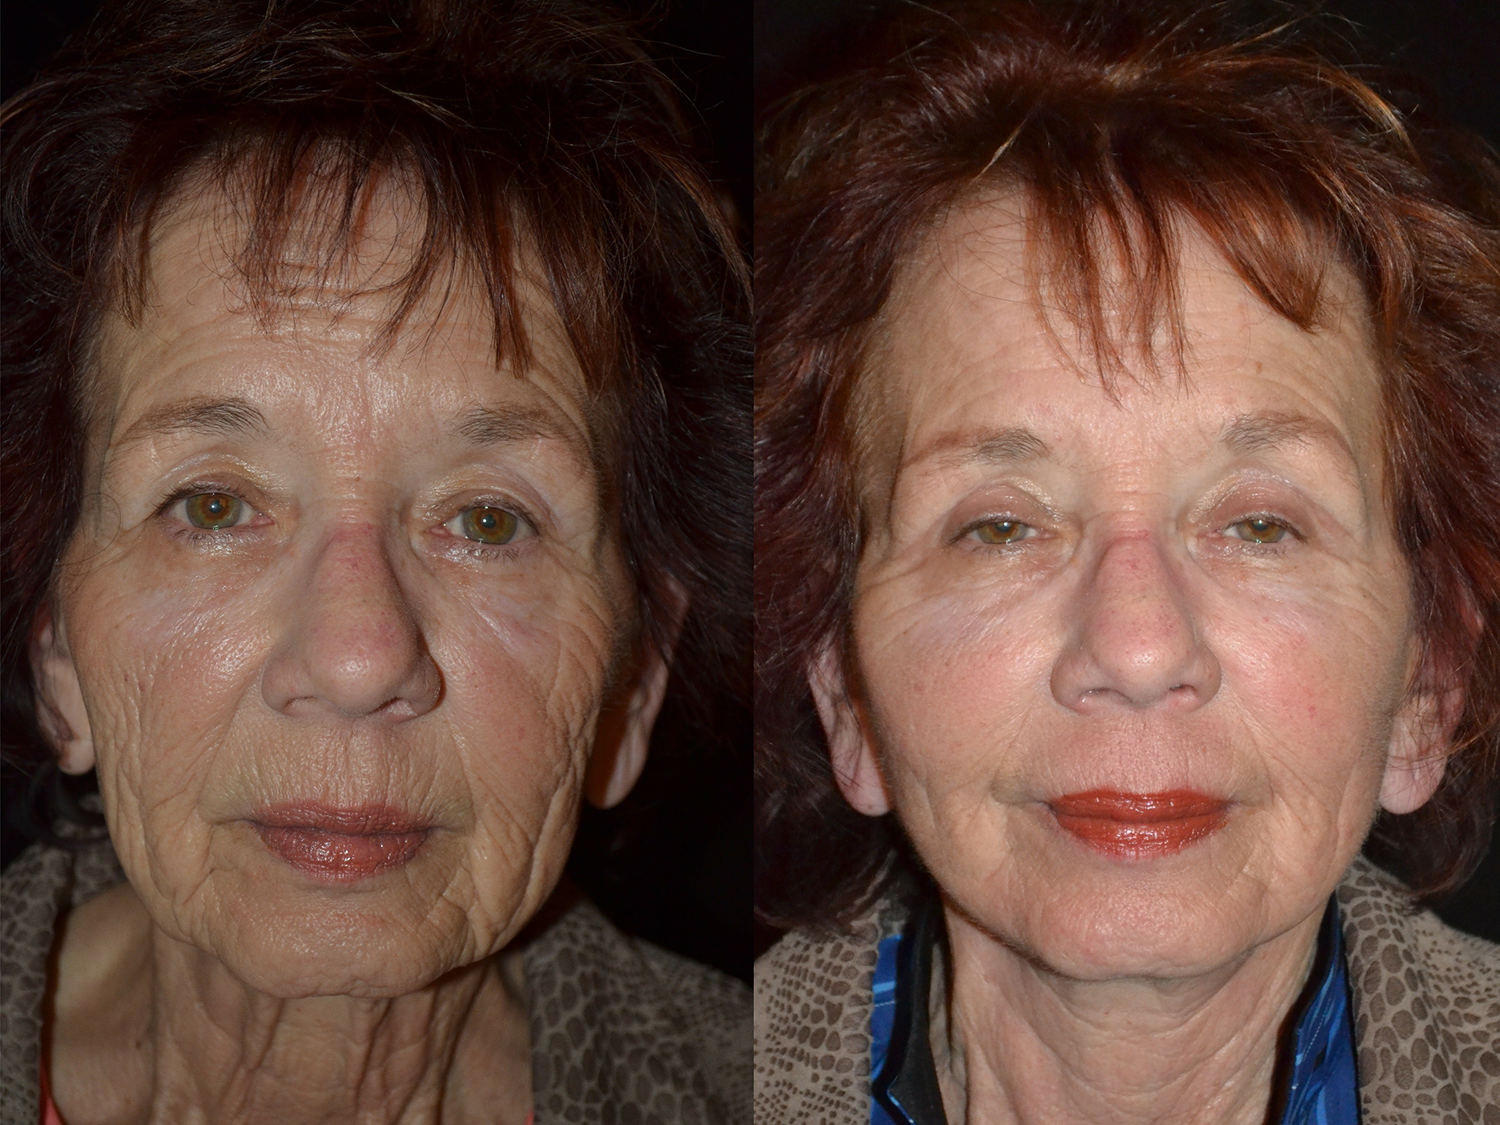 Facial Autologous Fat Transfer Before and After Photo by Renaissance Plastic Surgery in Troy Michigan